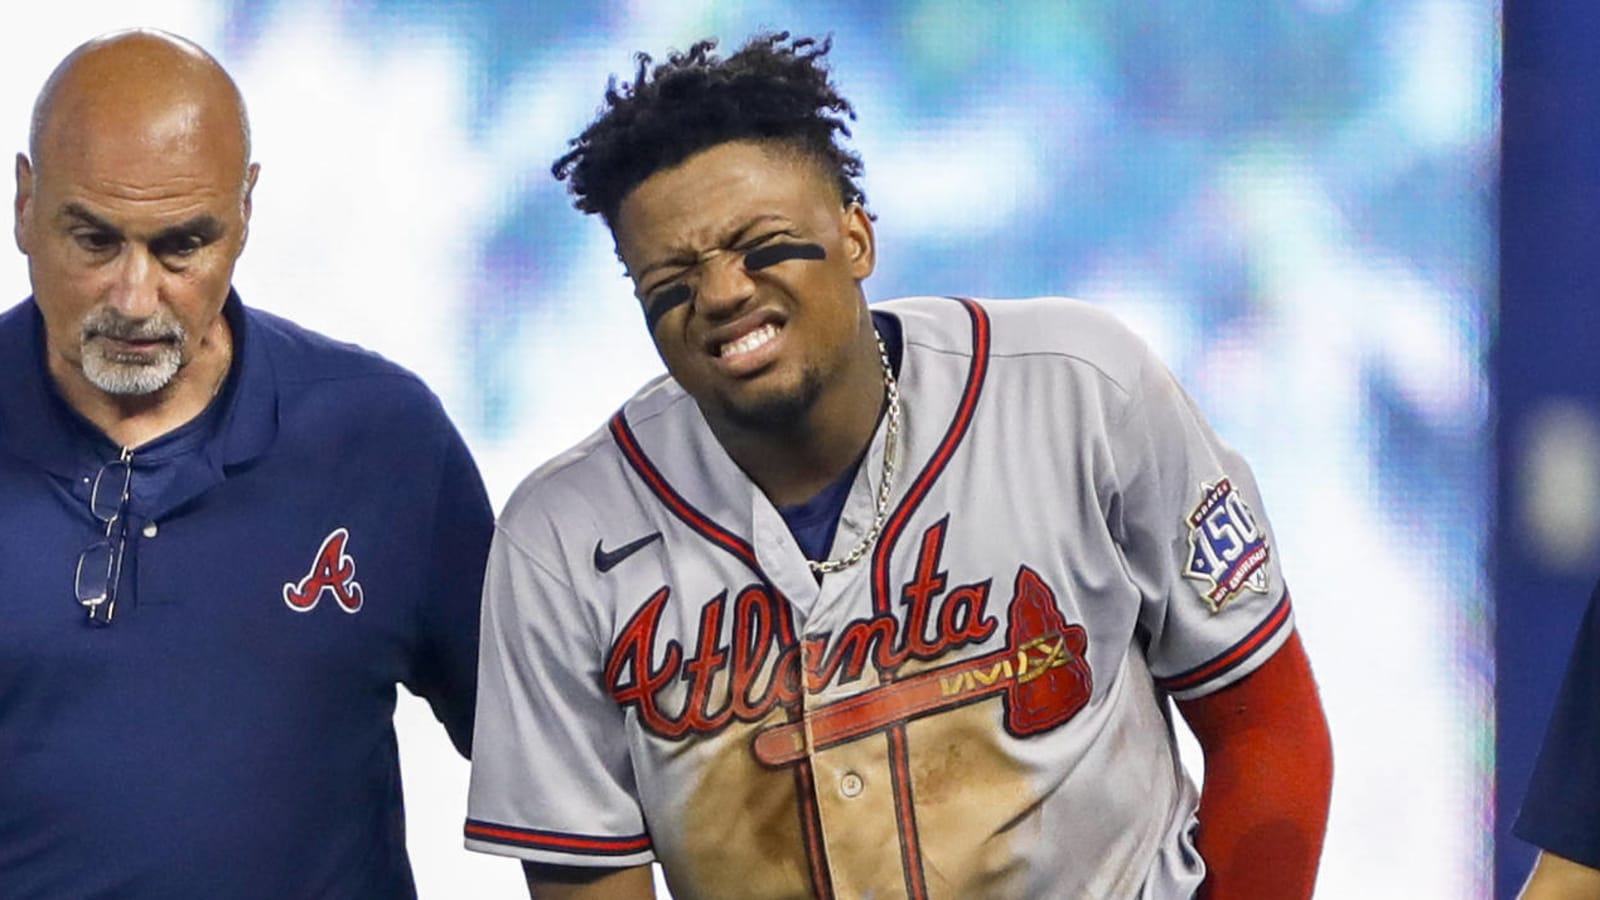 Acuna to undergo season-ending surgery after suffering torn ACL